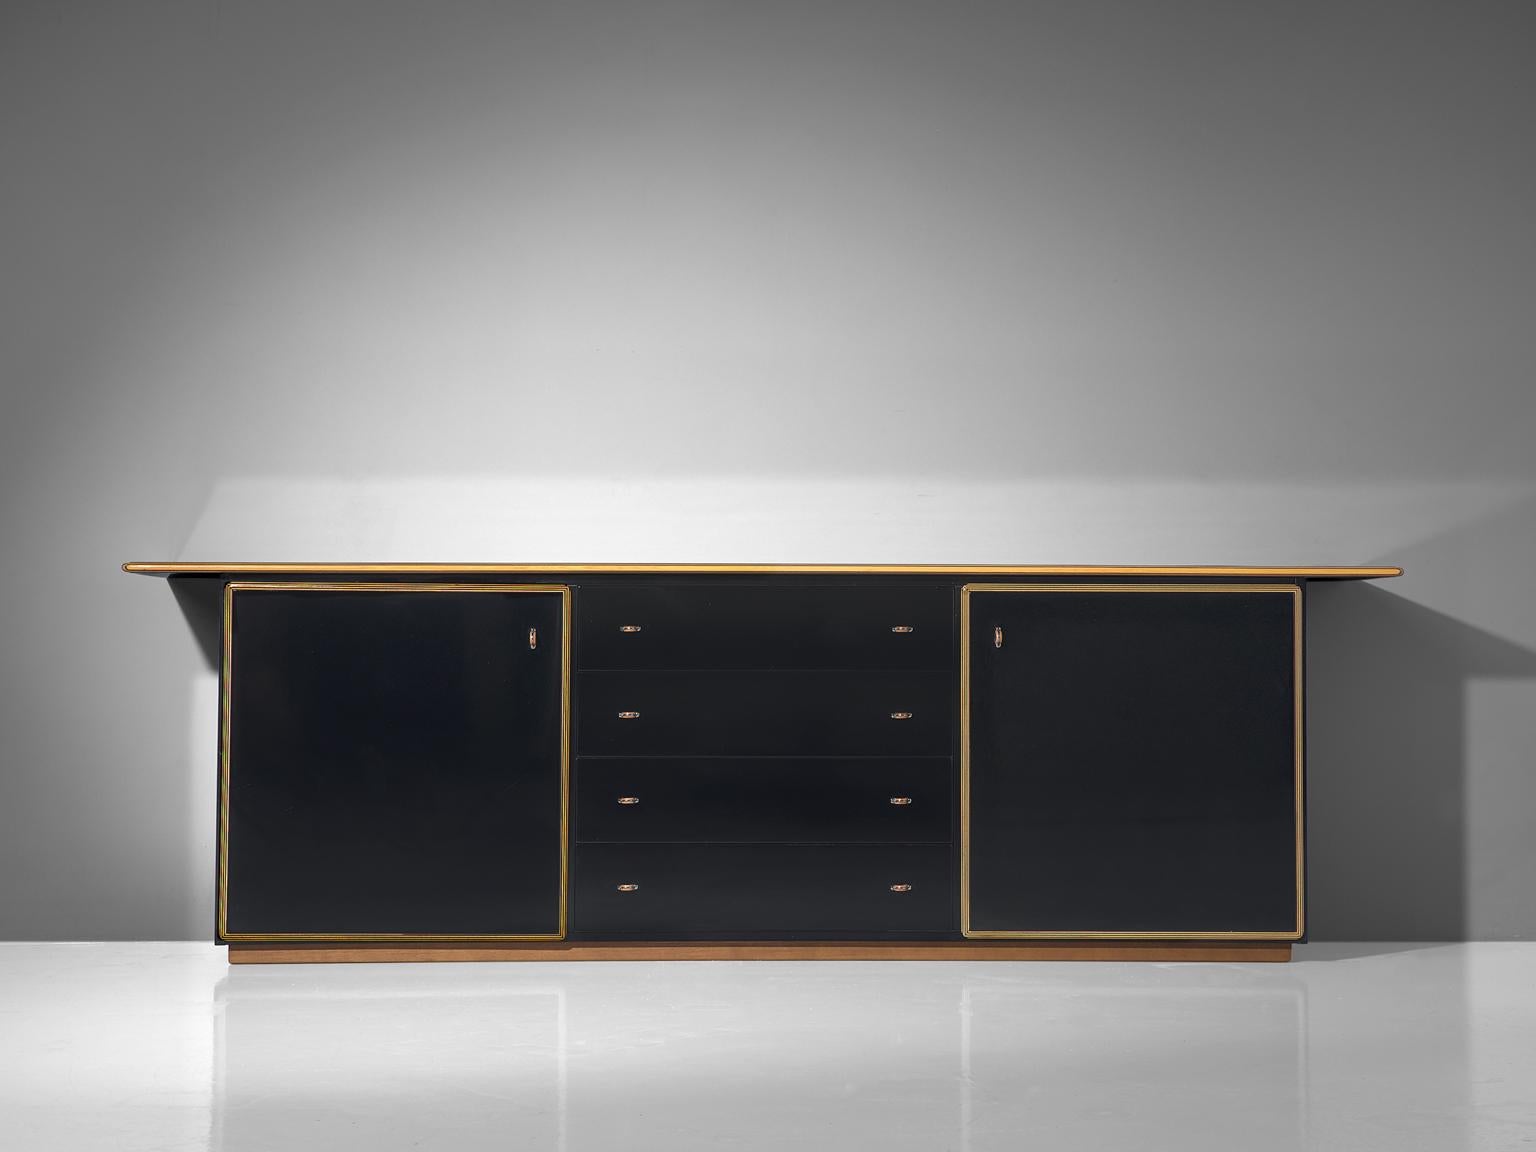 Afra & Tobia Scarpa, Artona cabinet, walnut and four leather doors, Italy, circa 1975

This sideboard with black lacquered drawers, doors and top is designed as part of the Artona line by the Scarpa duo was in fact the first line ever produced by